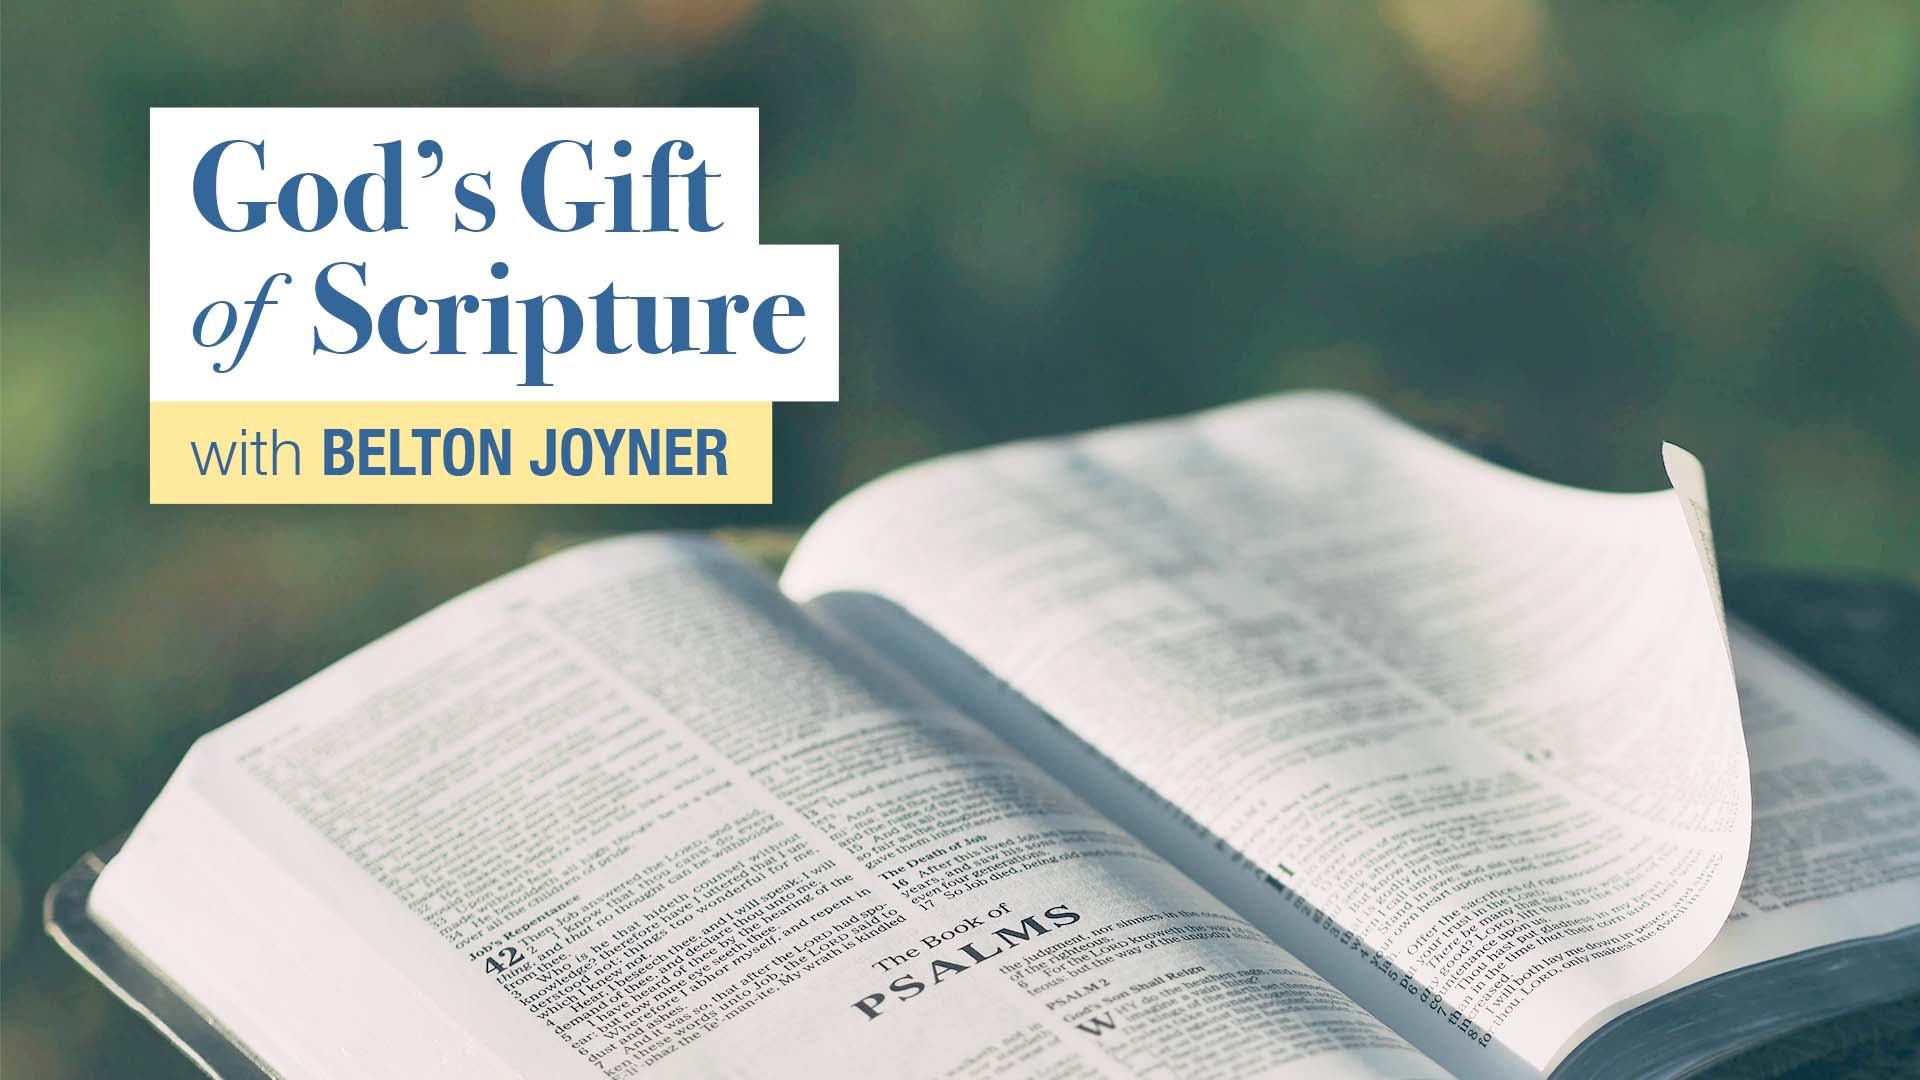 New Bible Study Podcast: “God’s Gift of Scripture with Belton Joyner”